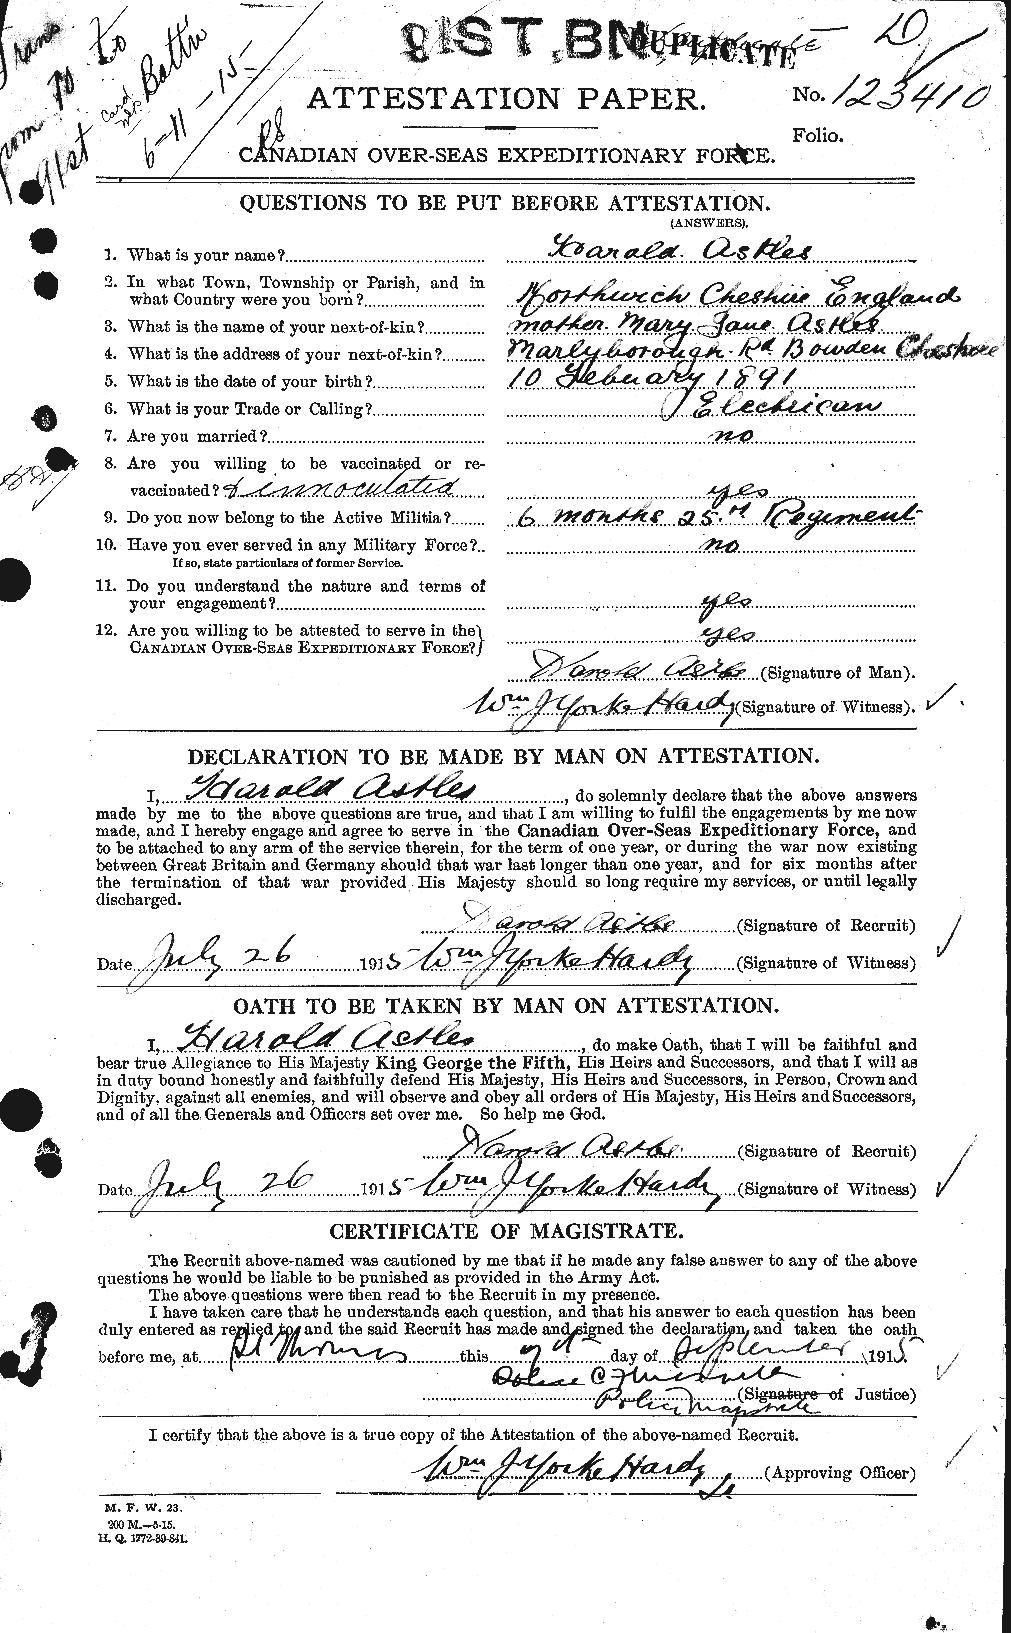 Personnel Records of the First World War - CEF 217131a